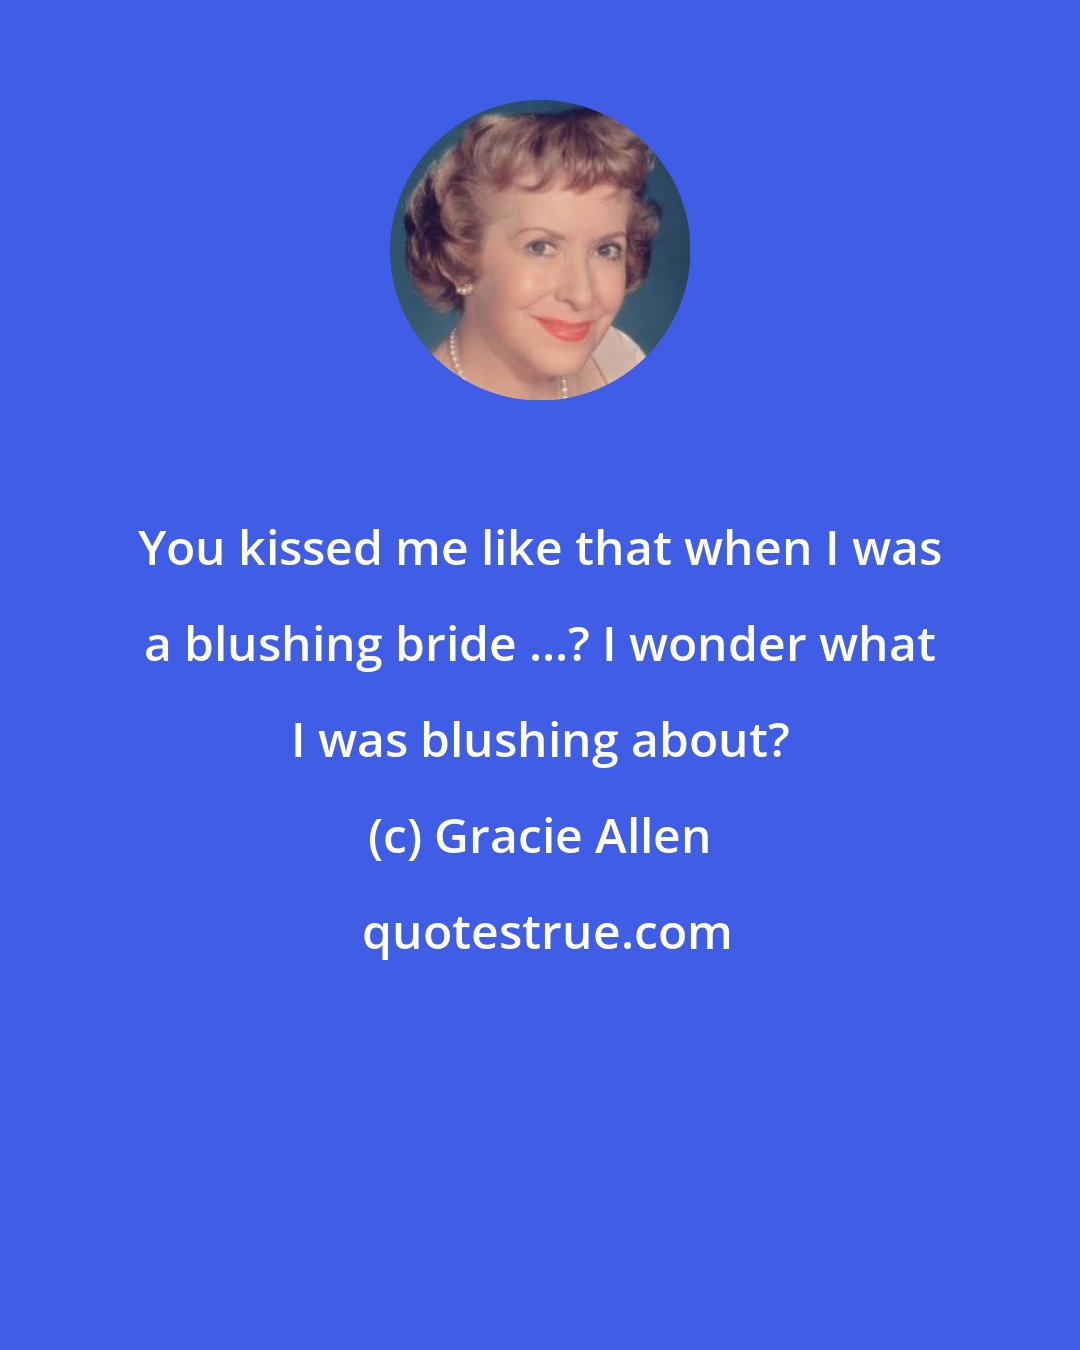 Gracie Allen: You kissed me like that when I was a blushing bride ...? I wonder what I was blushing about?